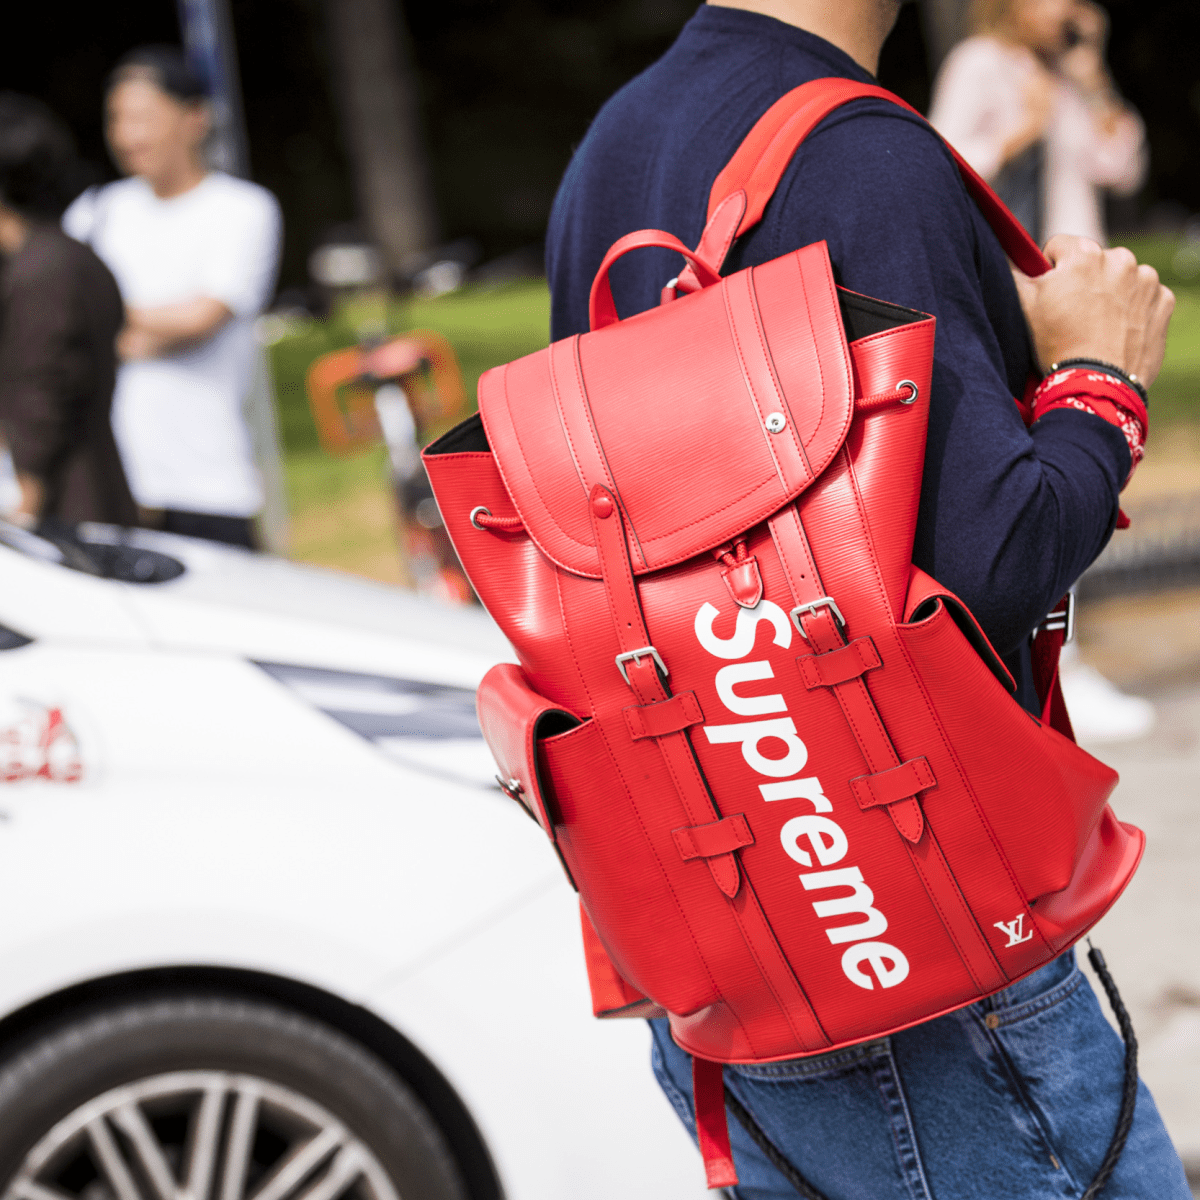 All you need to know about Supreme, fashion, Agenda